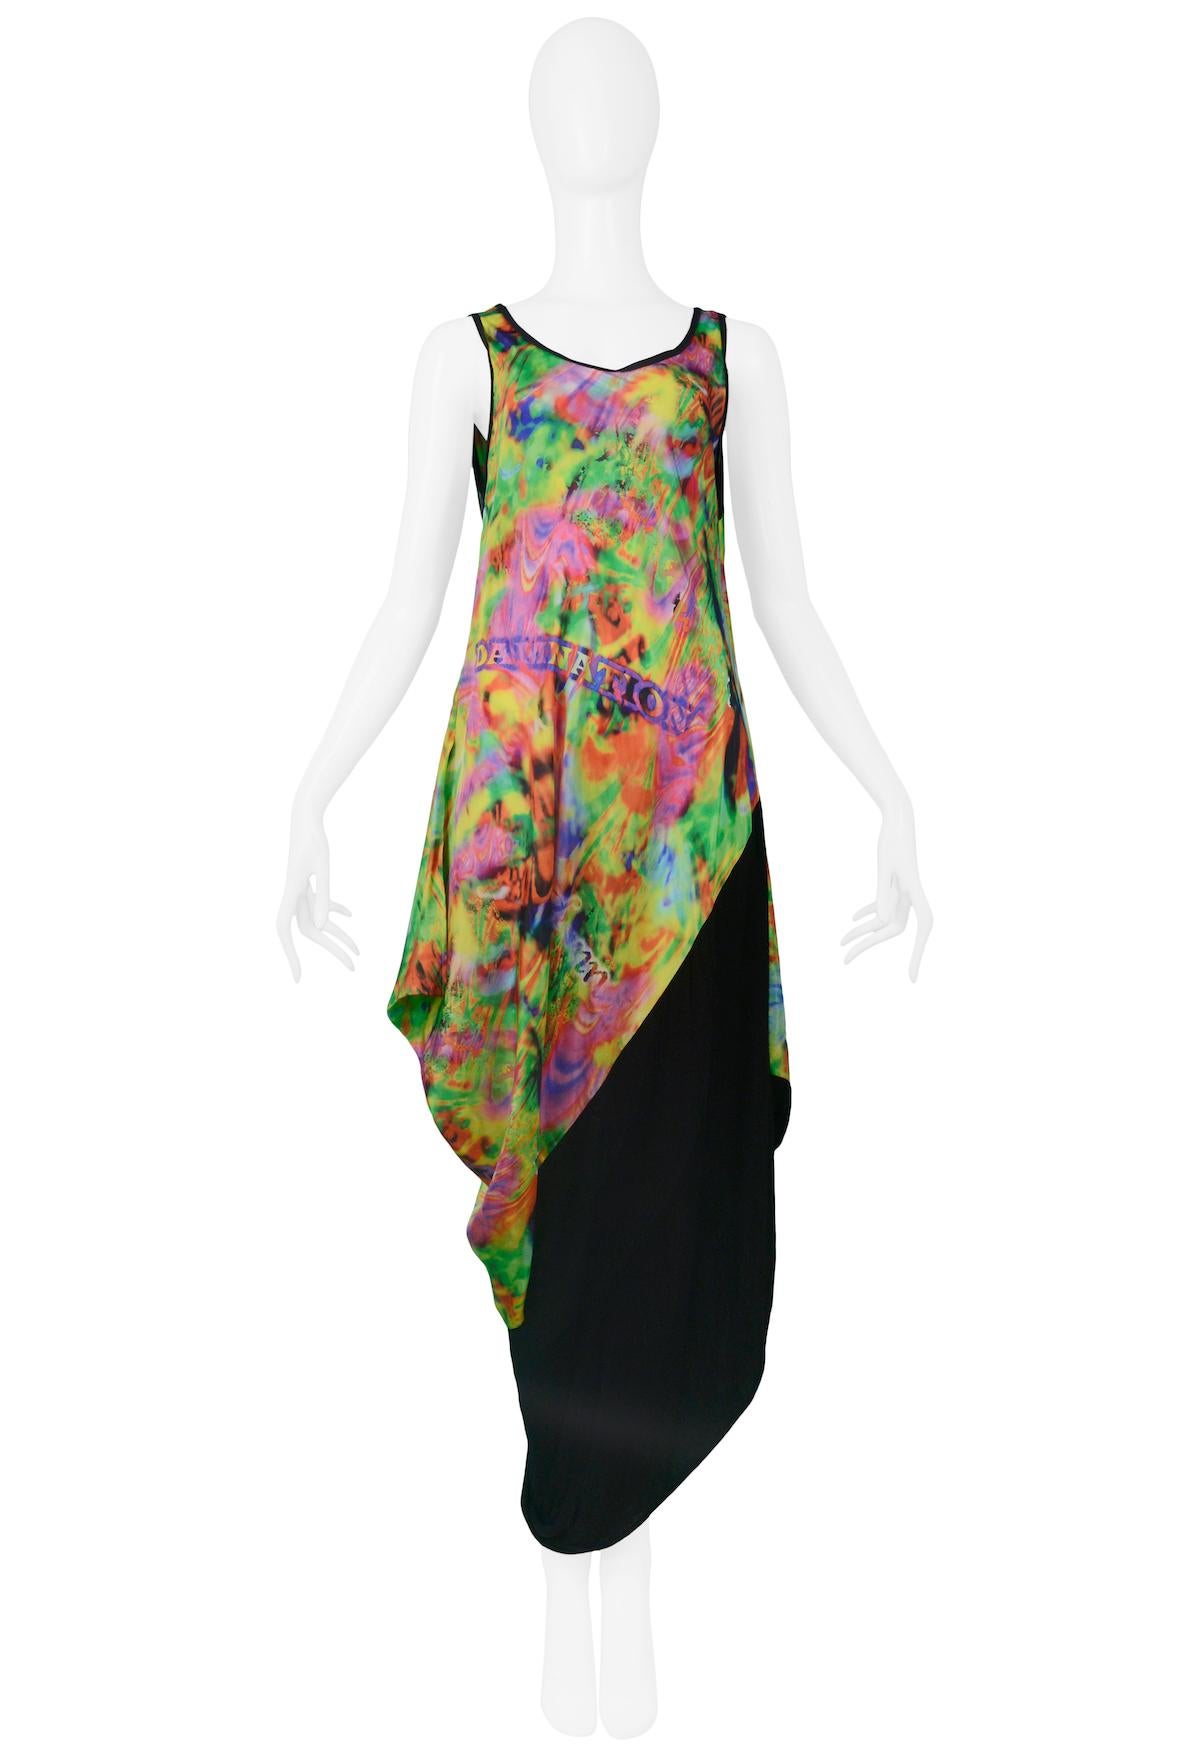 Yohji Yamamoto neon multicolor silk tank gown with asymmetrical drape. Features psychedelic print with the word 